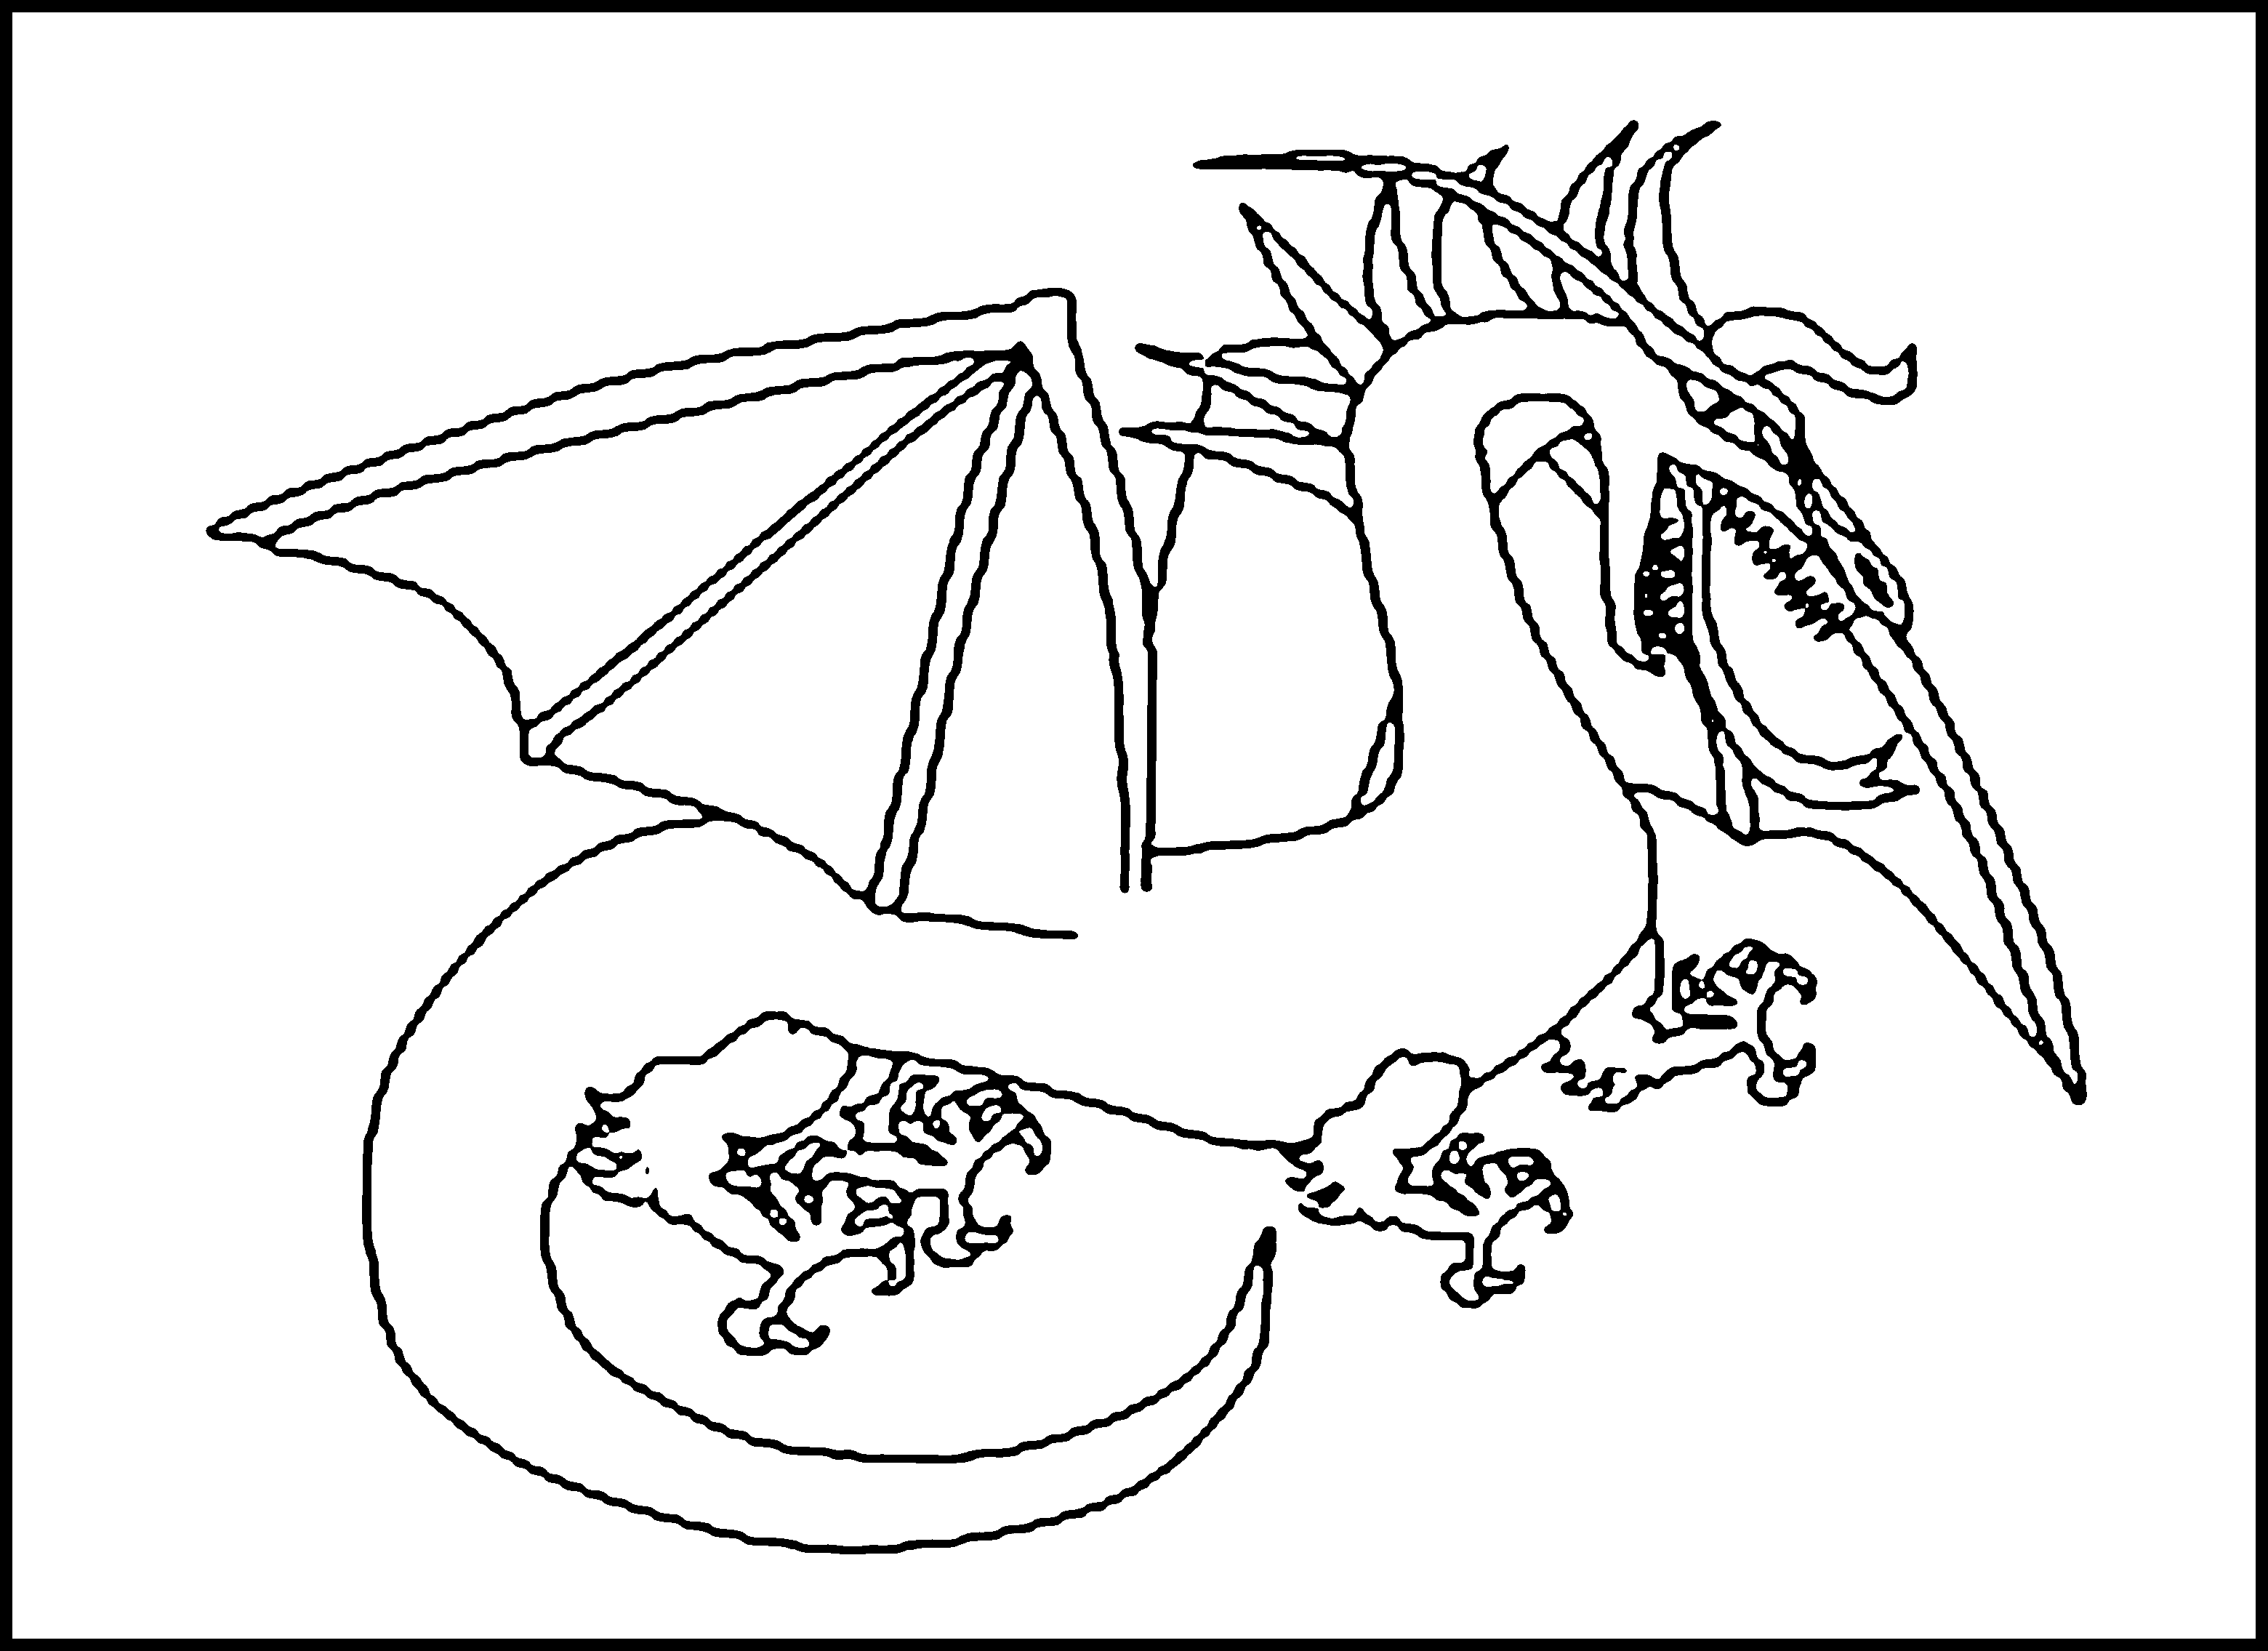 Dragons  Coloring pages for Kids Printable Digital Downloadable